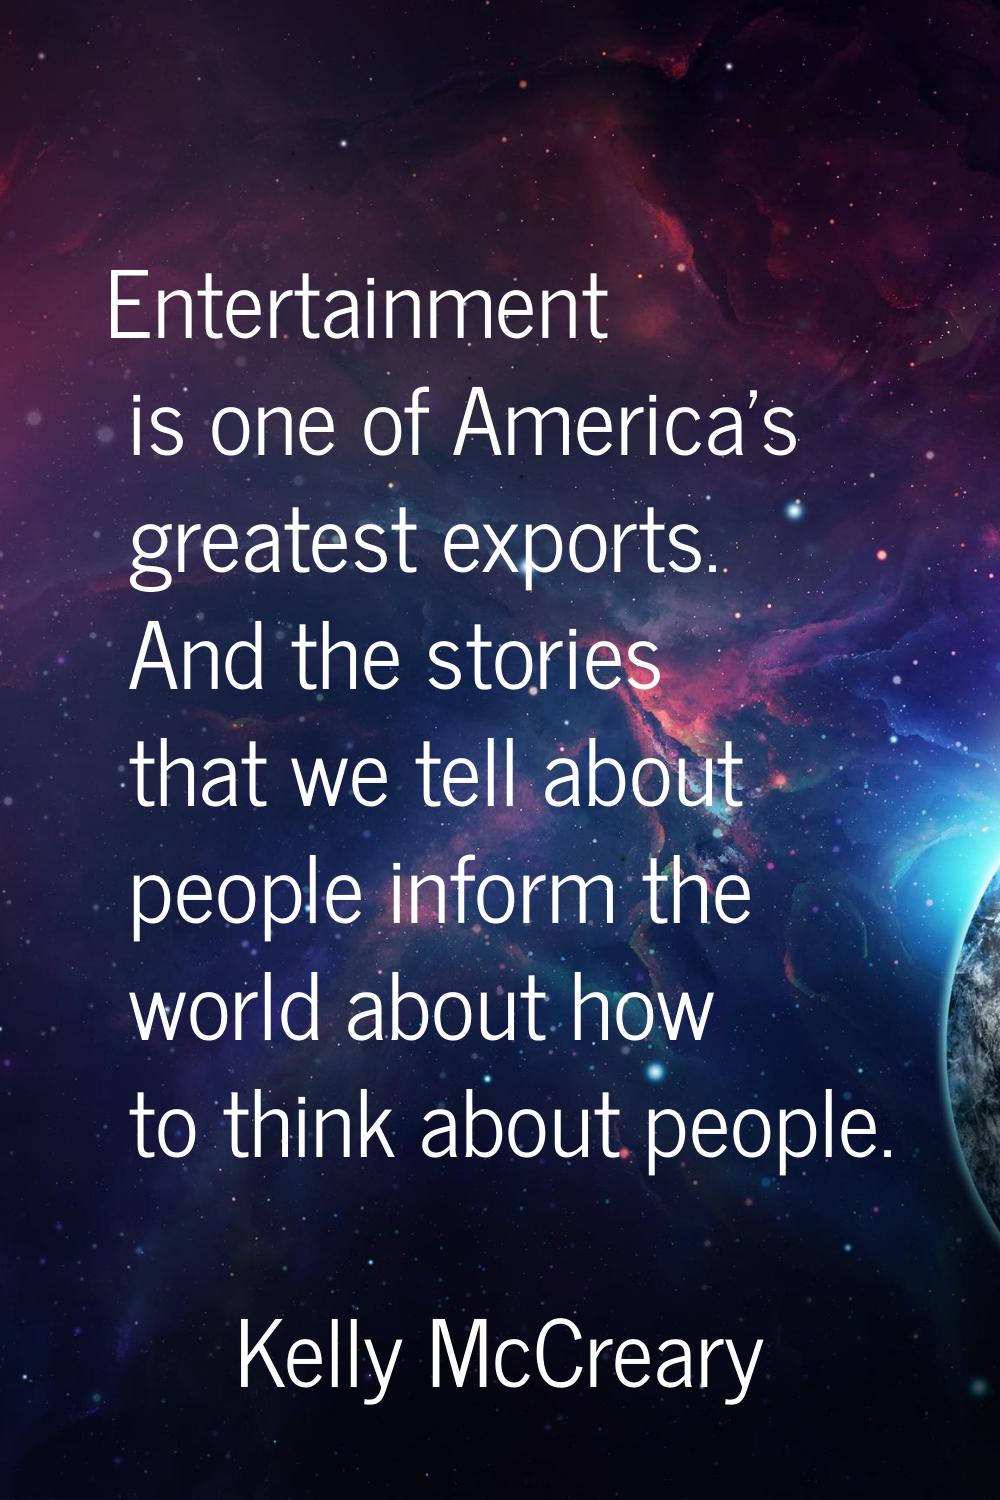 Entertainment is one of America's greatest exports. And the stories that we tell about people infor